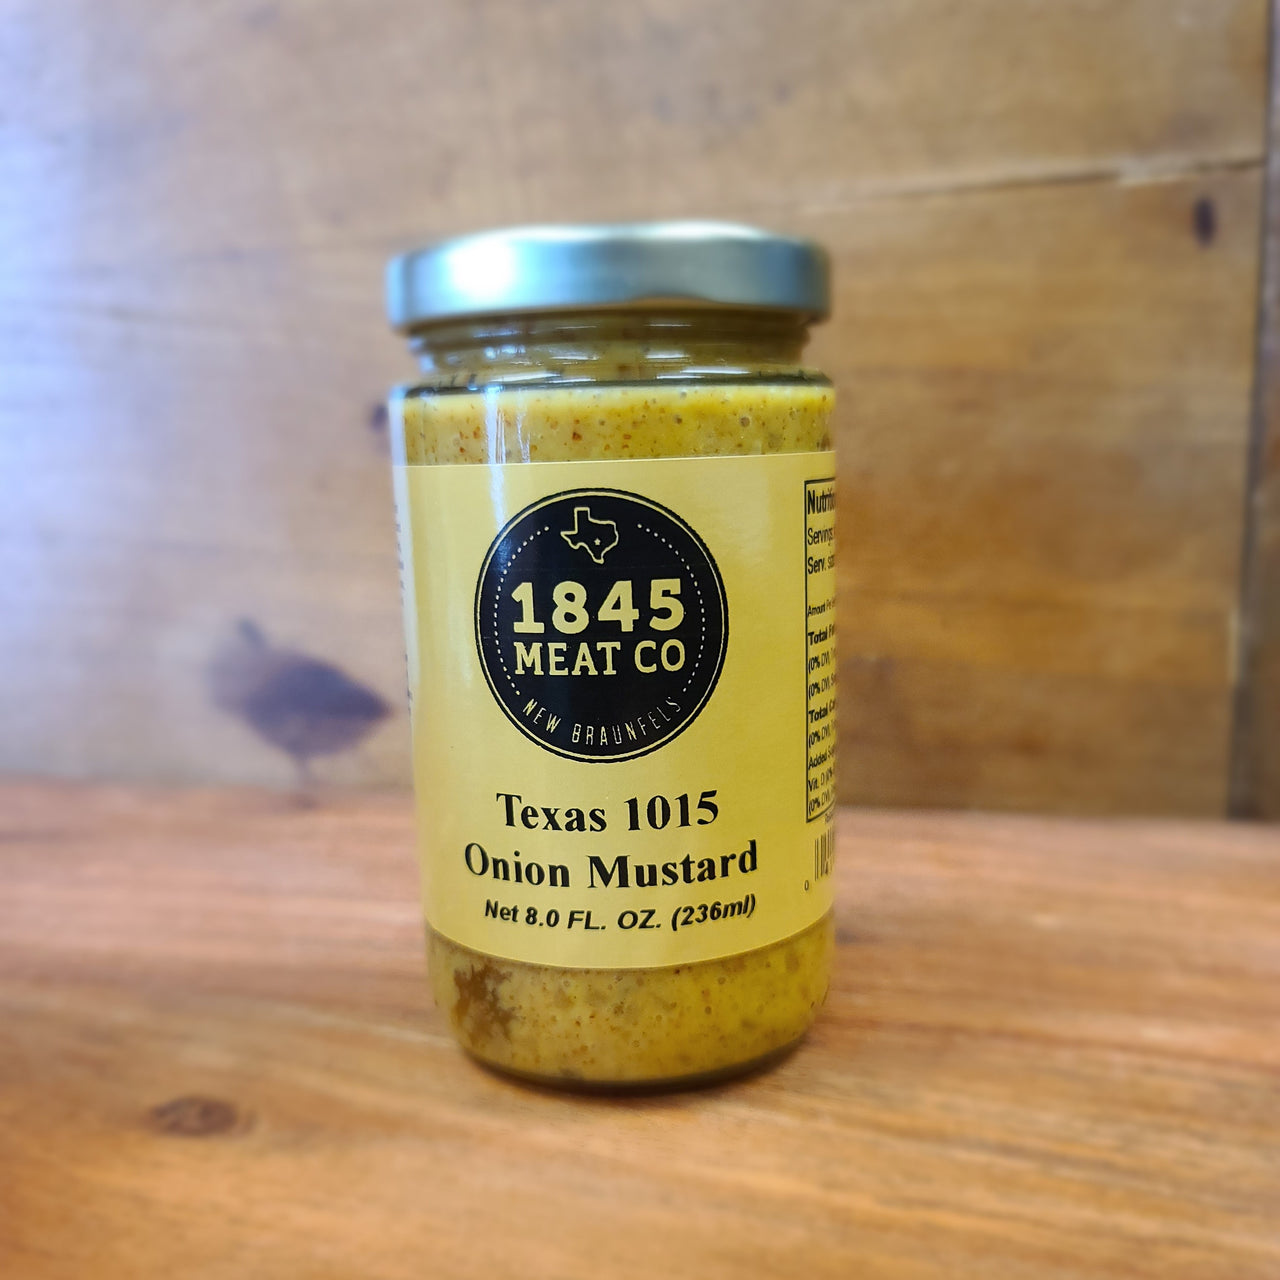 ﻿Sweet Texas 1015 onions and a classic gourmet mustard combined to make a great condiment.  Add to your sandwich or as an addition for a sauce.